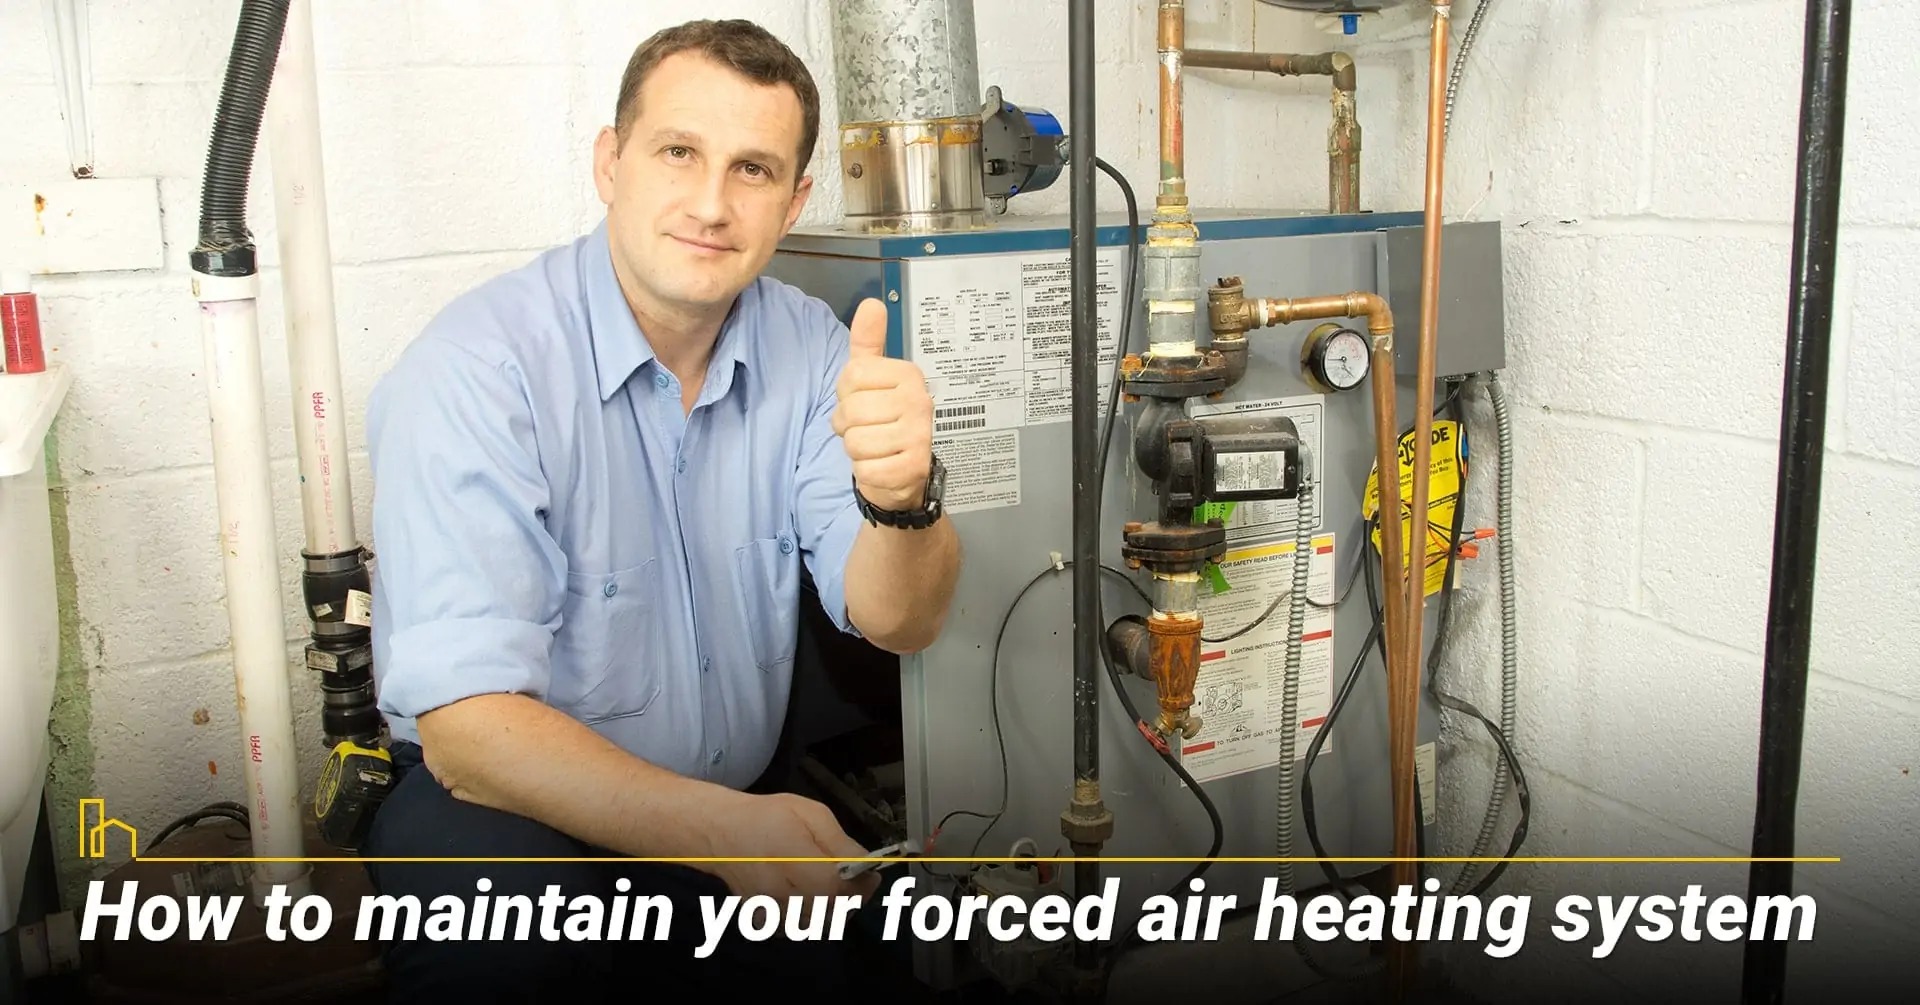 How to maintain your forced air heating system, way to keep forced air system function properly